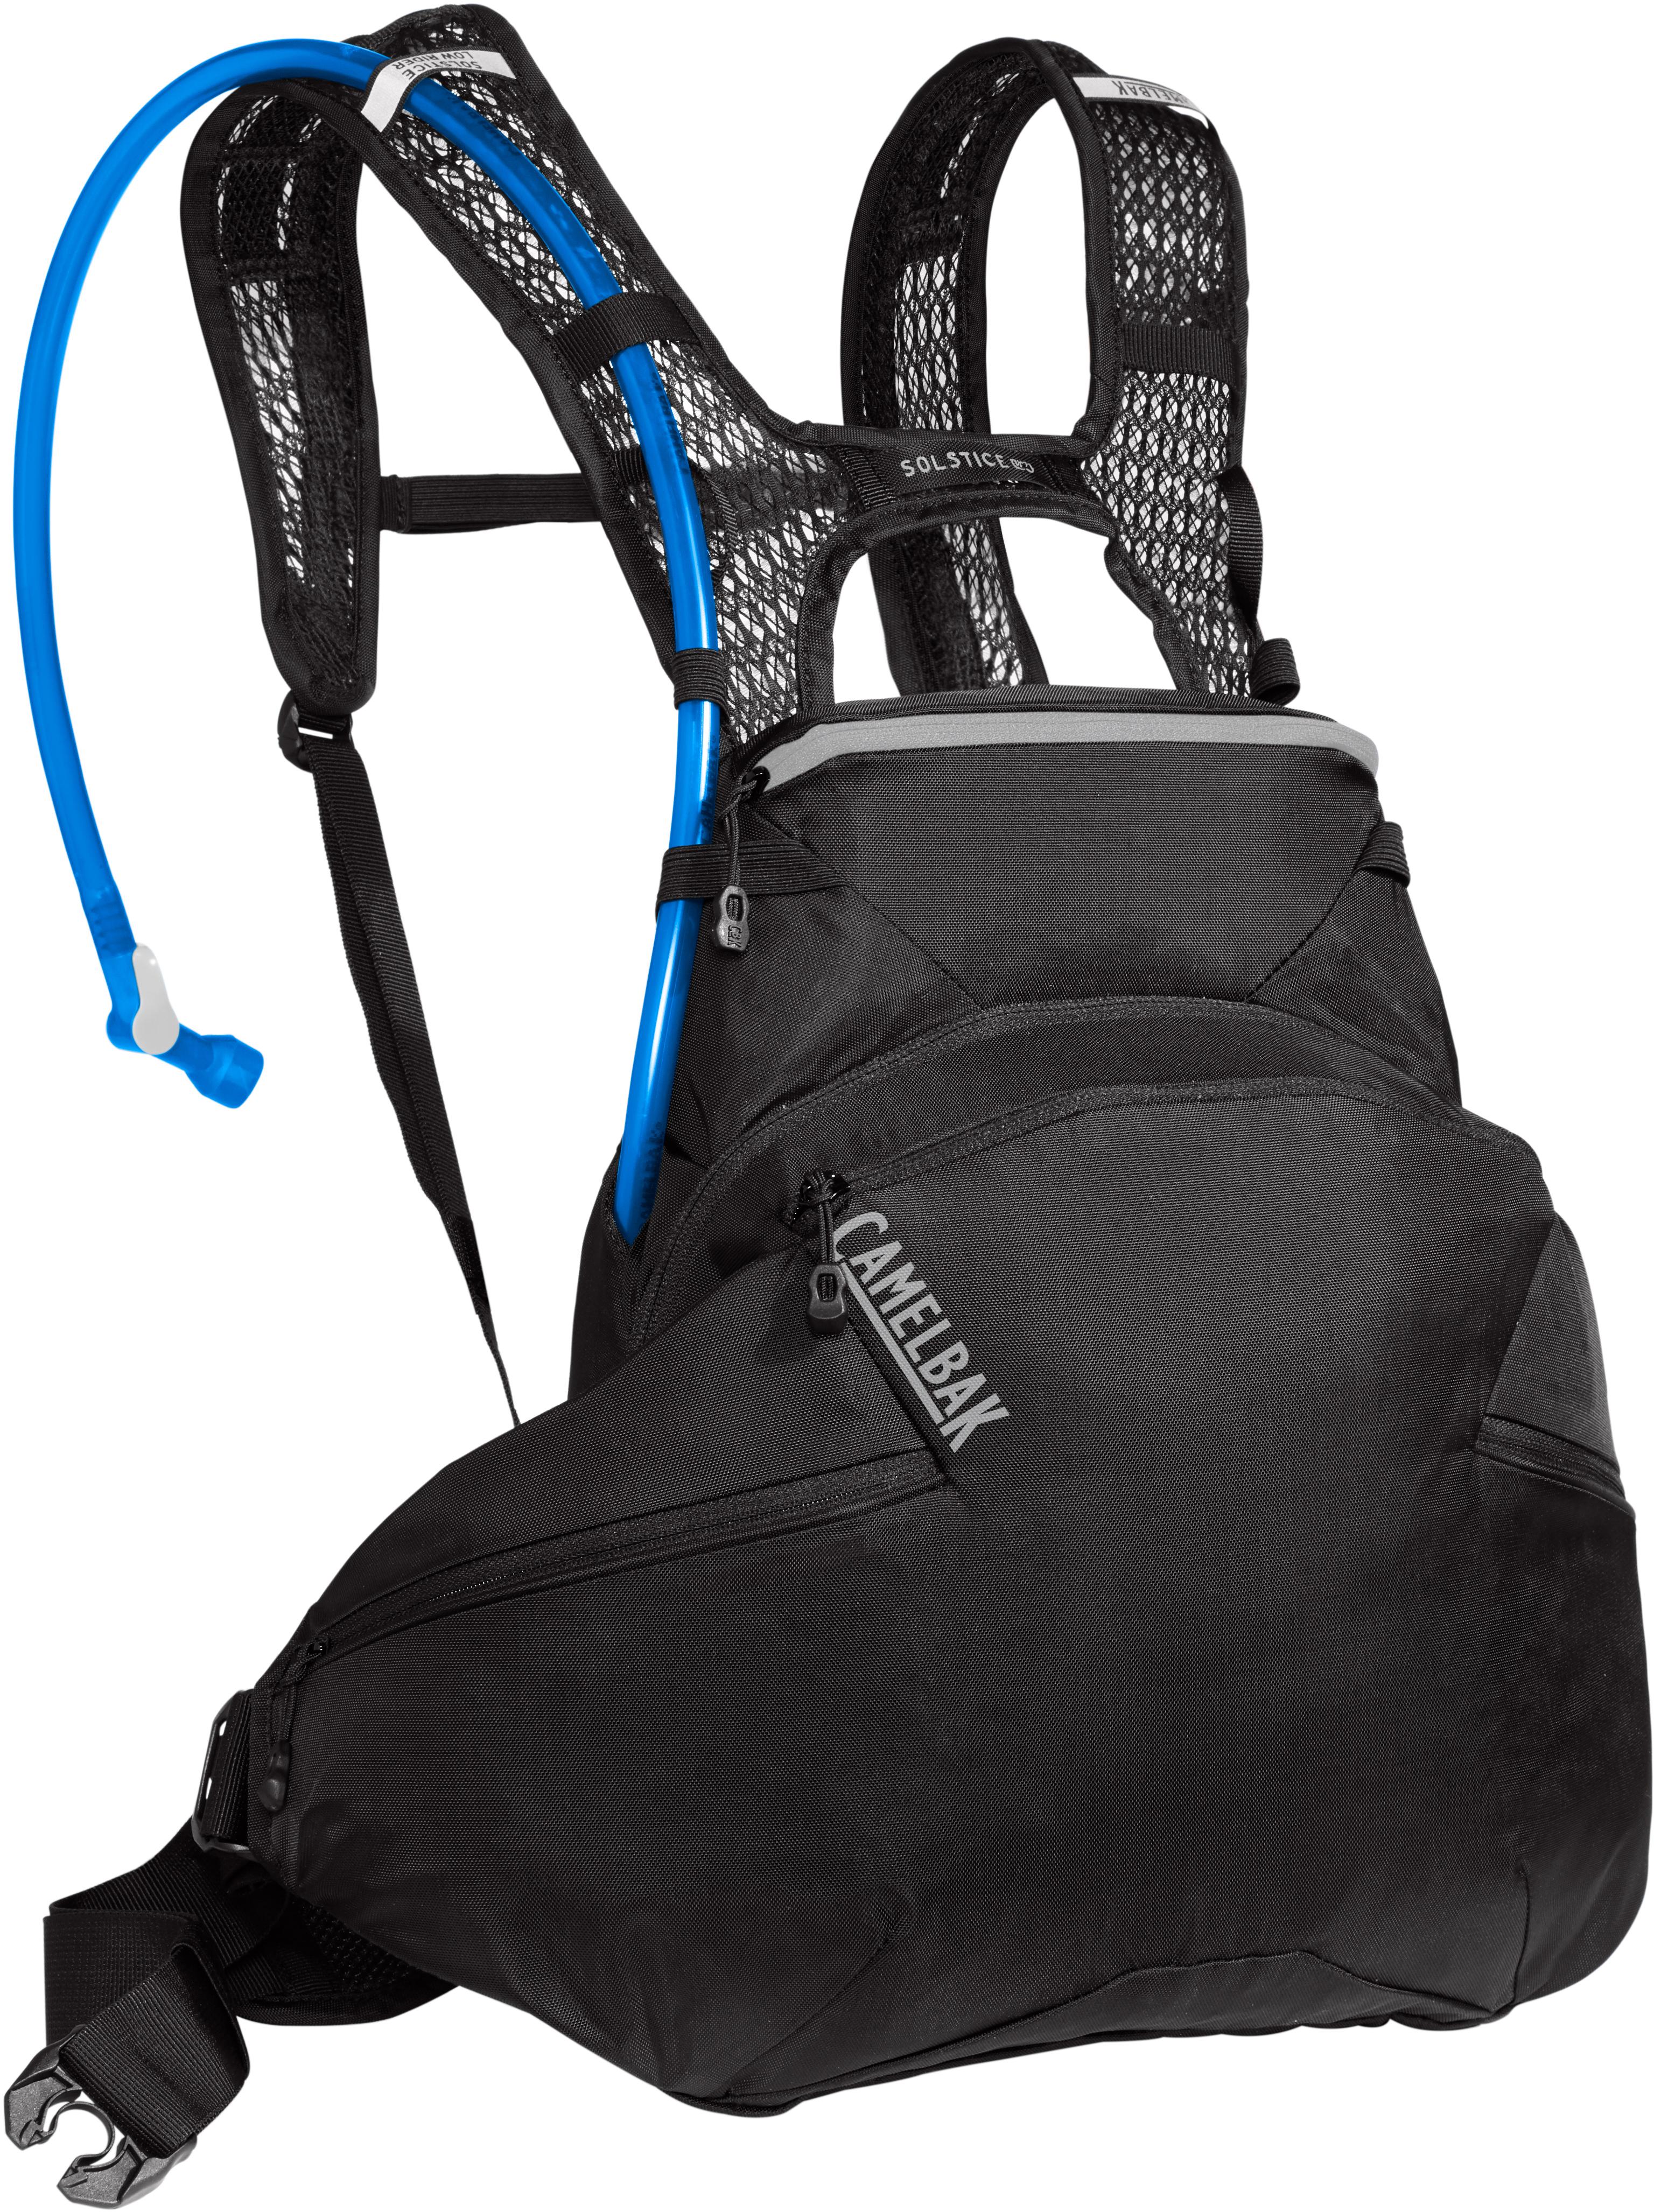 Camelbak Women's Solstice Lr 10 Low Rider Hydration Pack (Redesign) 2020: Black/Silver 3L/100Oz